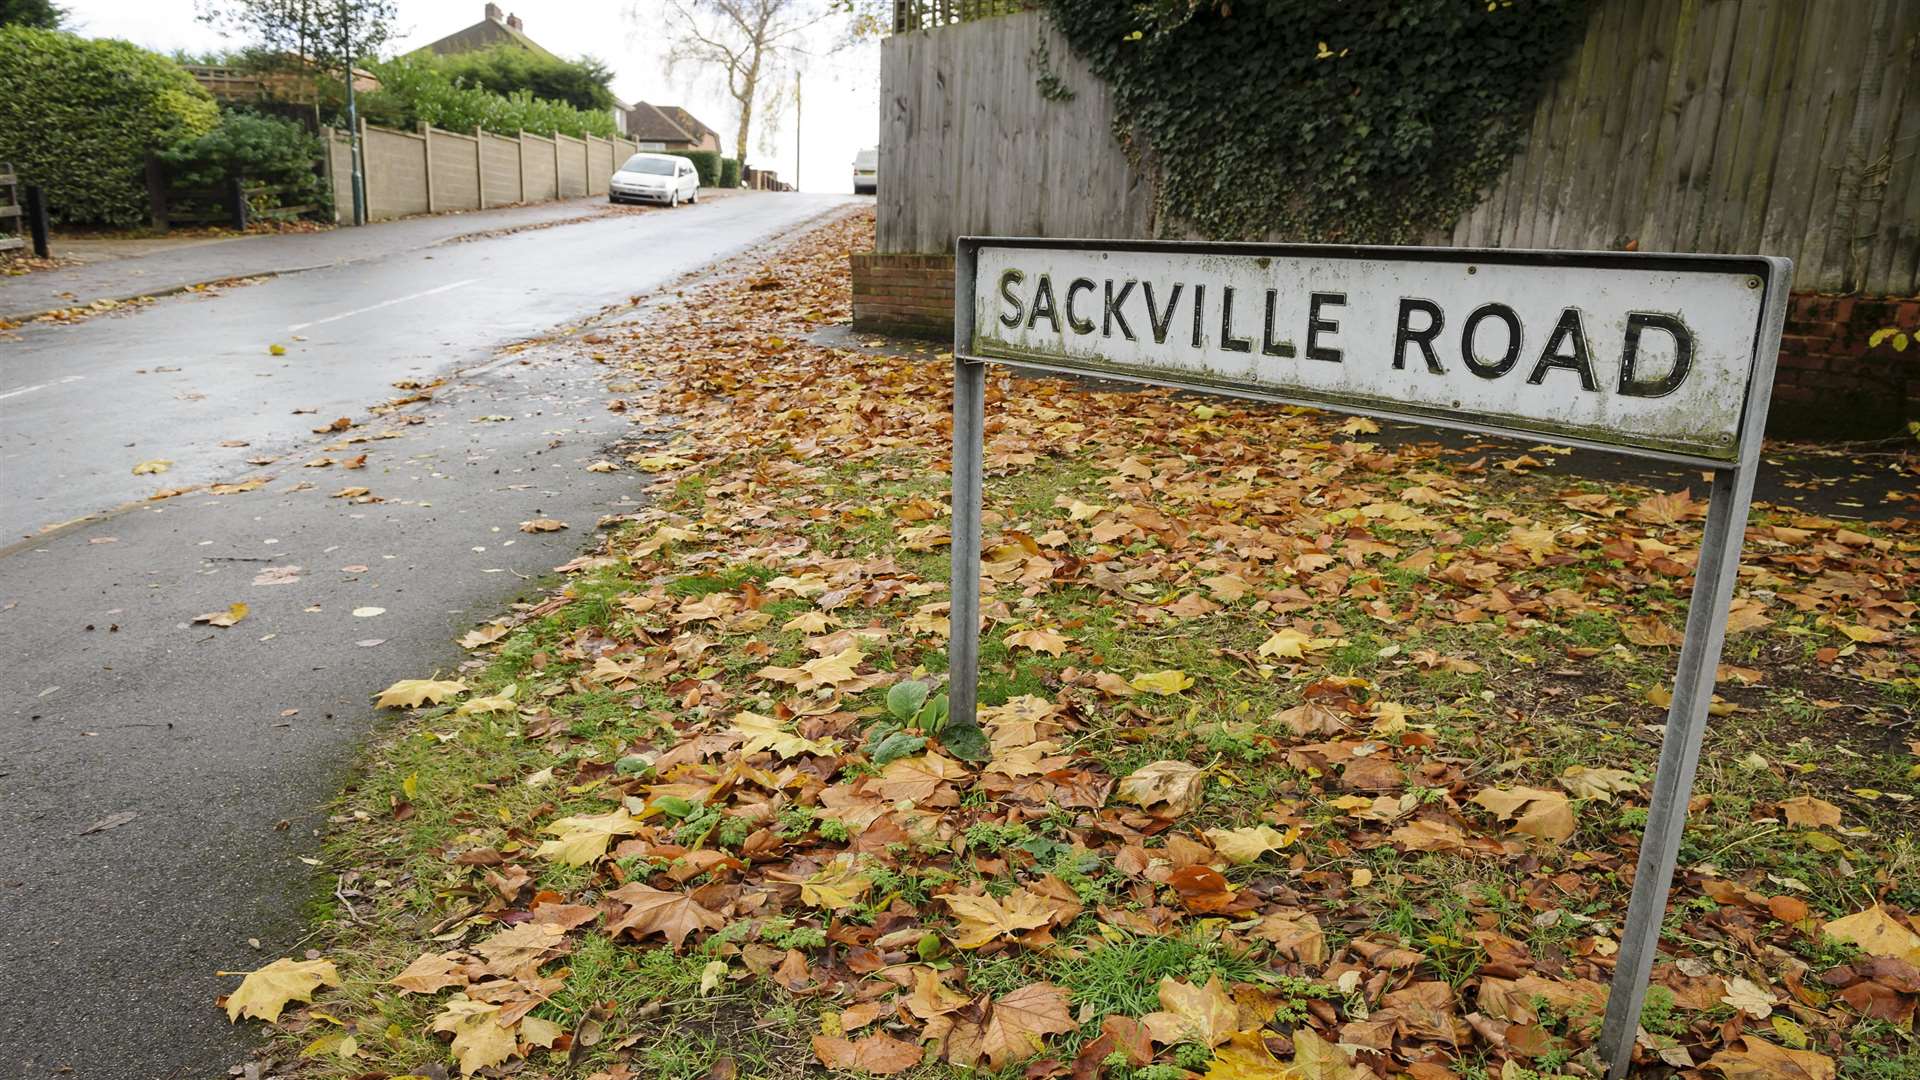 Colin Payne died at his home in Sackville Road